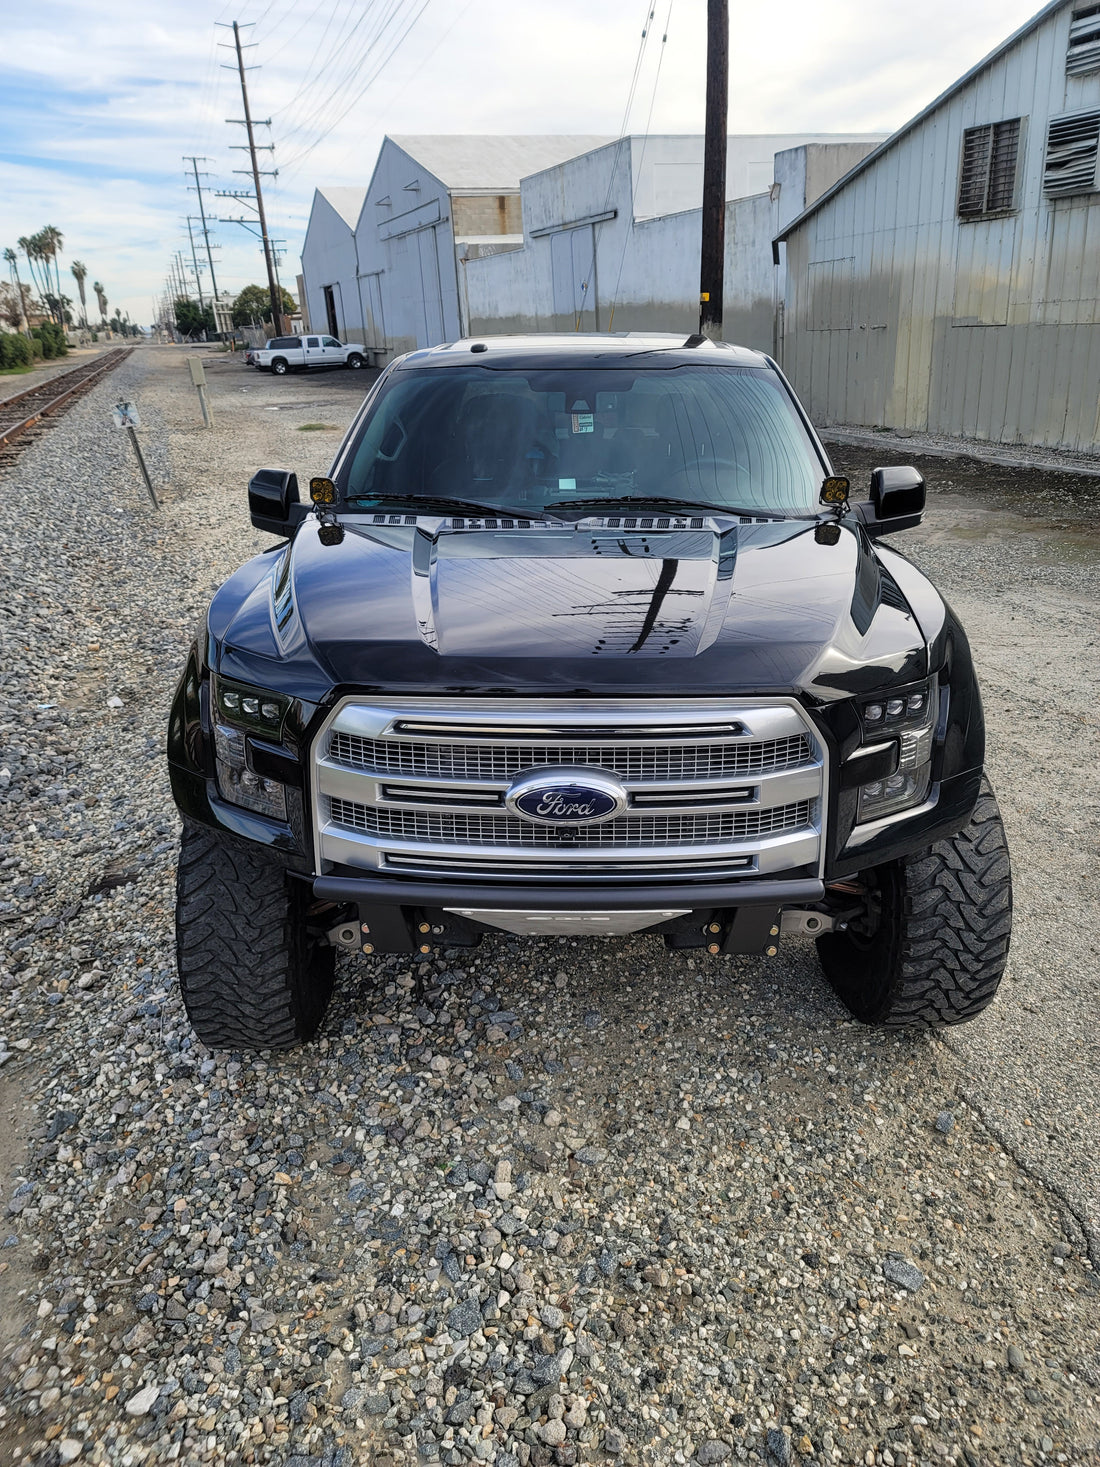 2015-2017 Ford F150 2017-2021 Ford Raptor "El Chiquito" Front Bumper